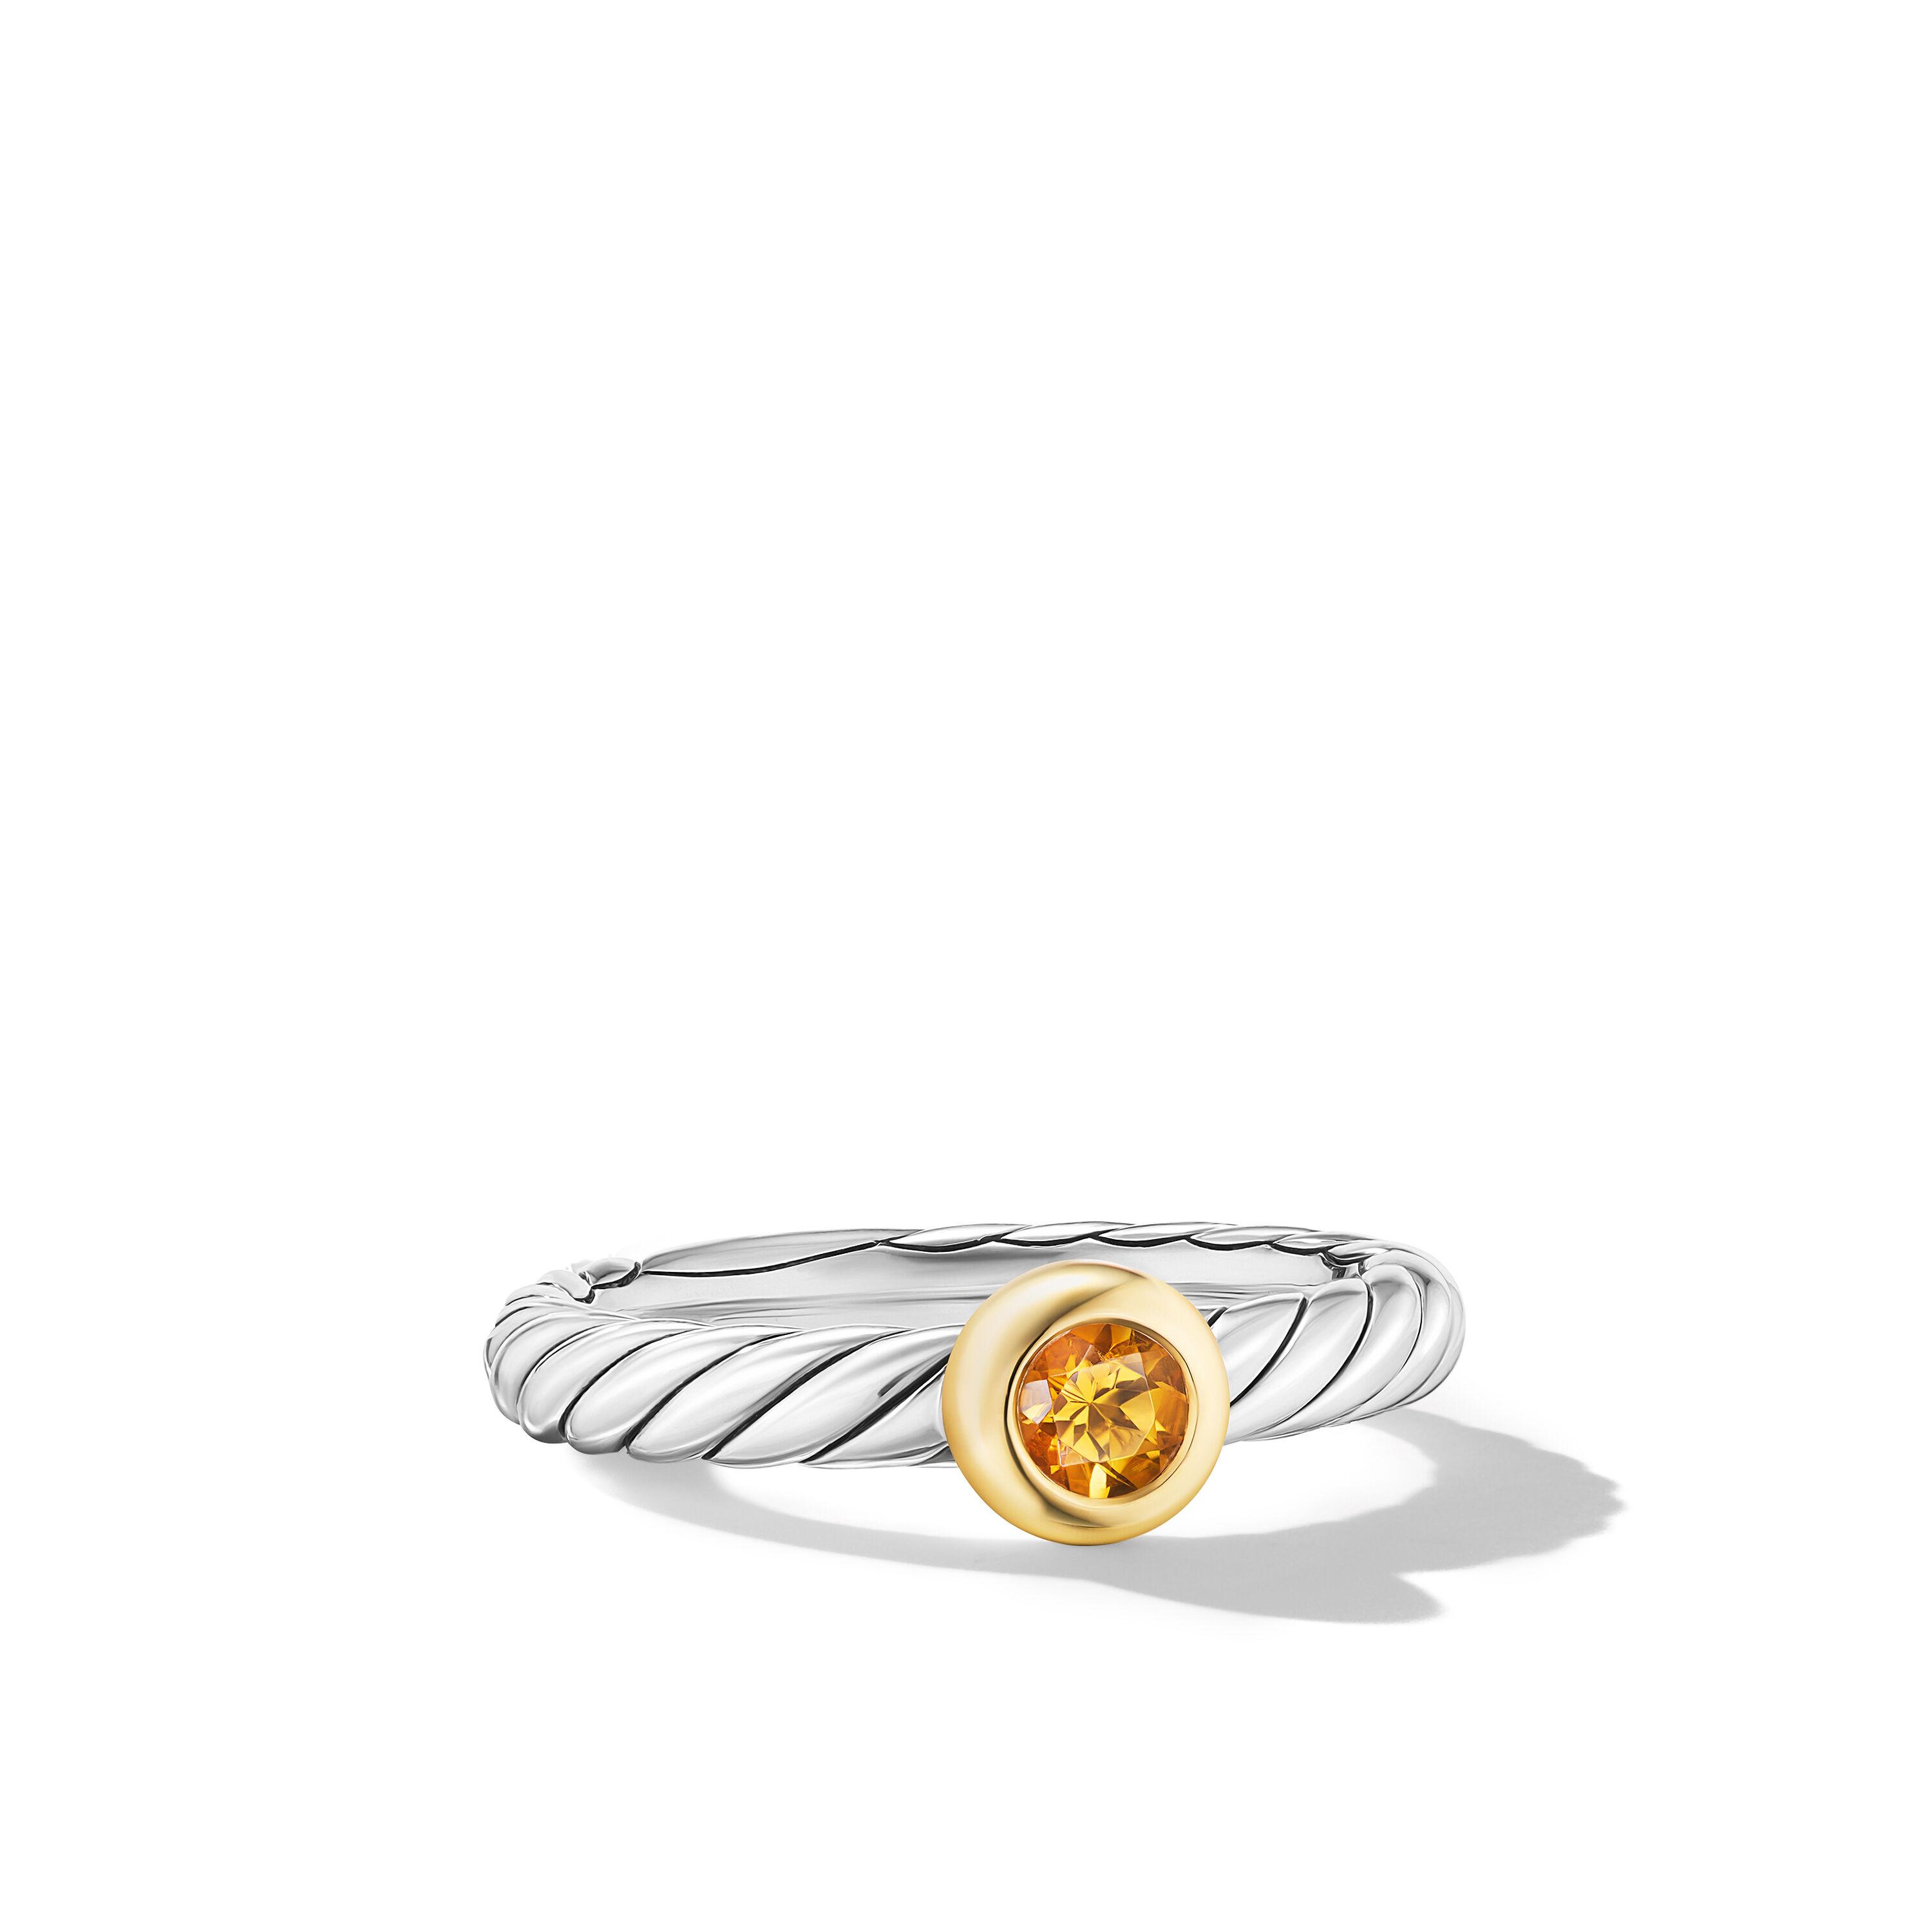 David Yurman Petite Cable Ring in Sterling Silver with 14K Yellow Gold and Citrine, Size 7 0